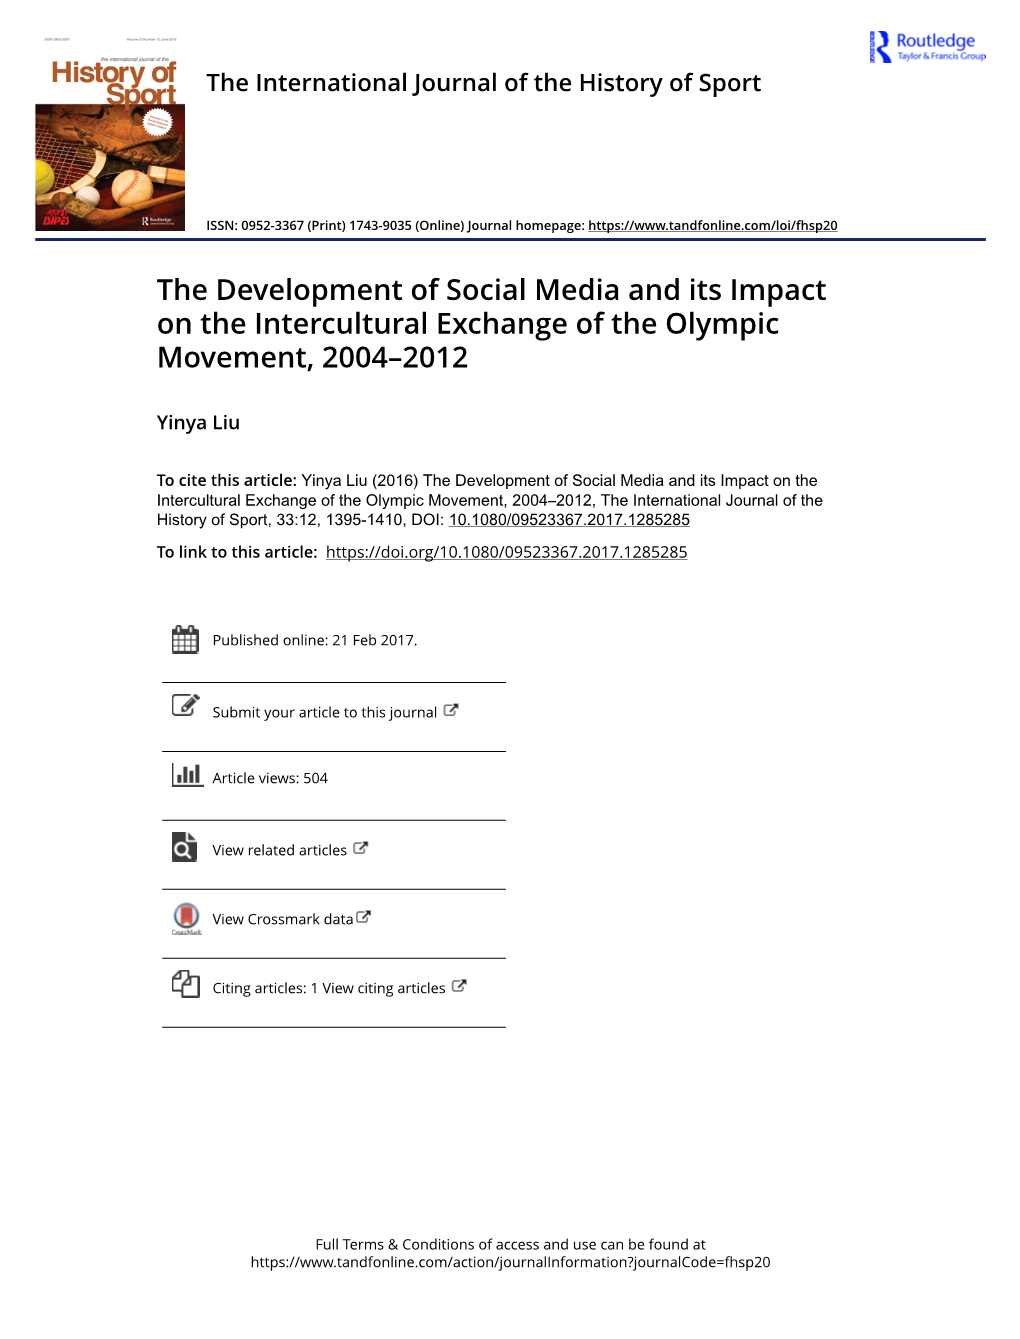 The Development of Social Media and Its Impact on the Intercultural Exchange of the Olympic Movement, 2004–2012